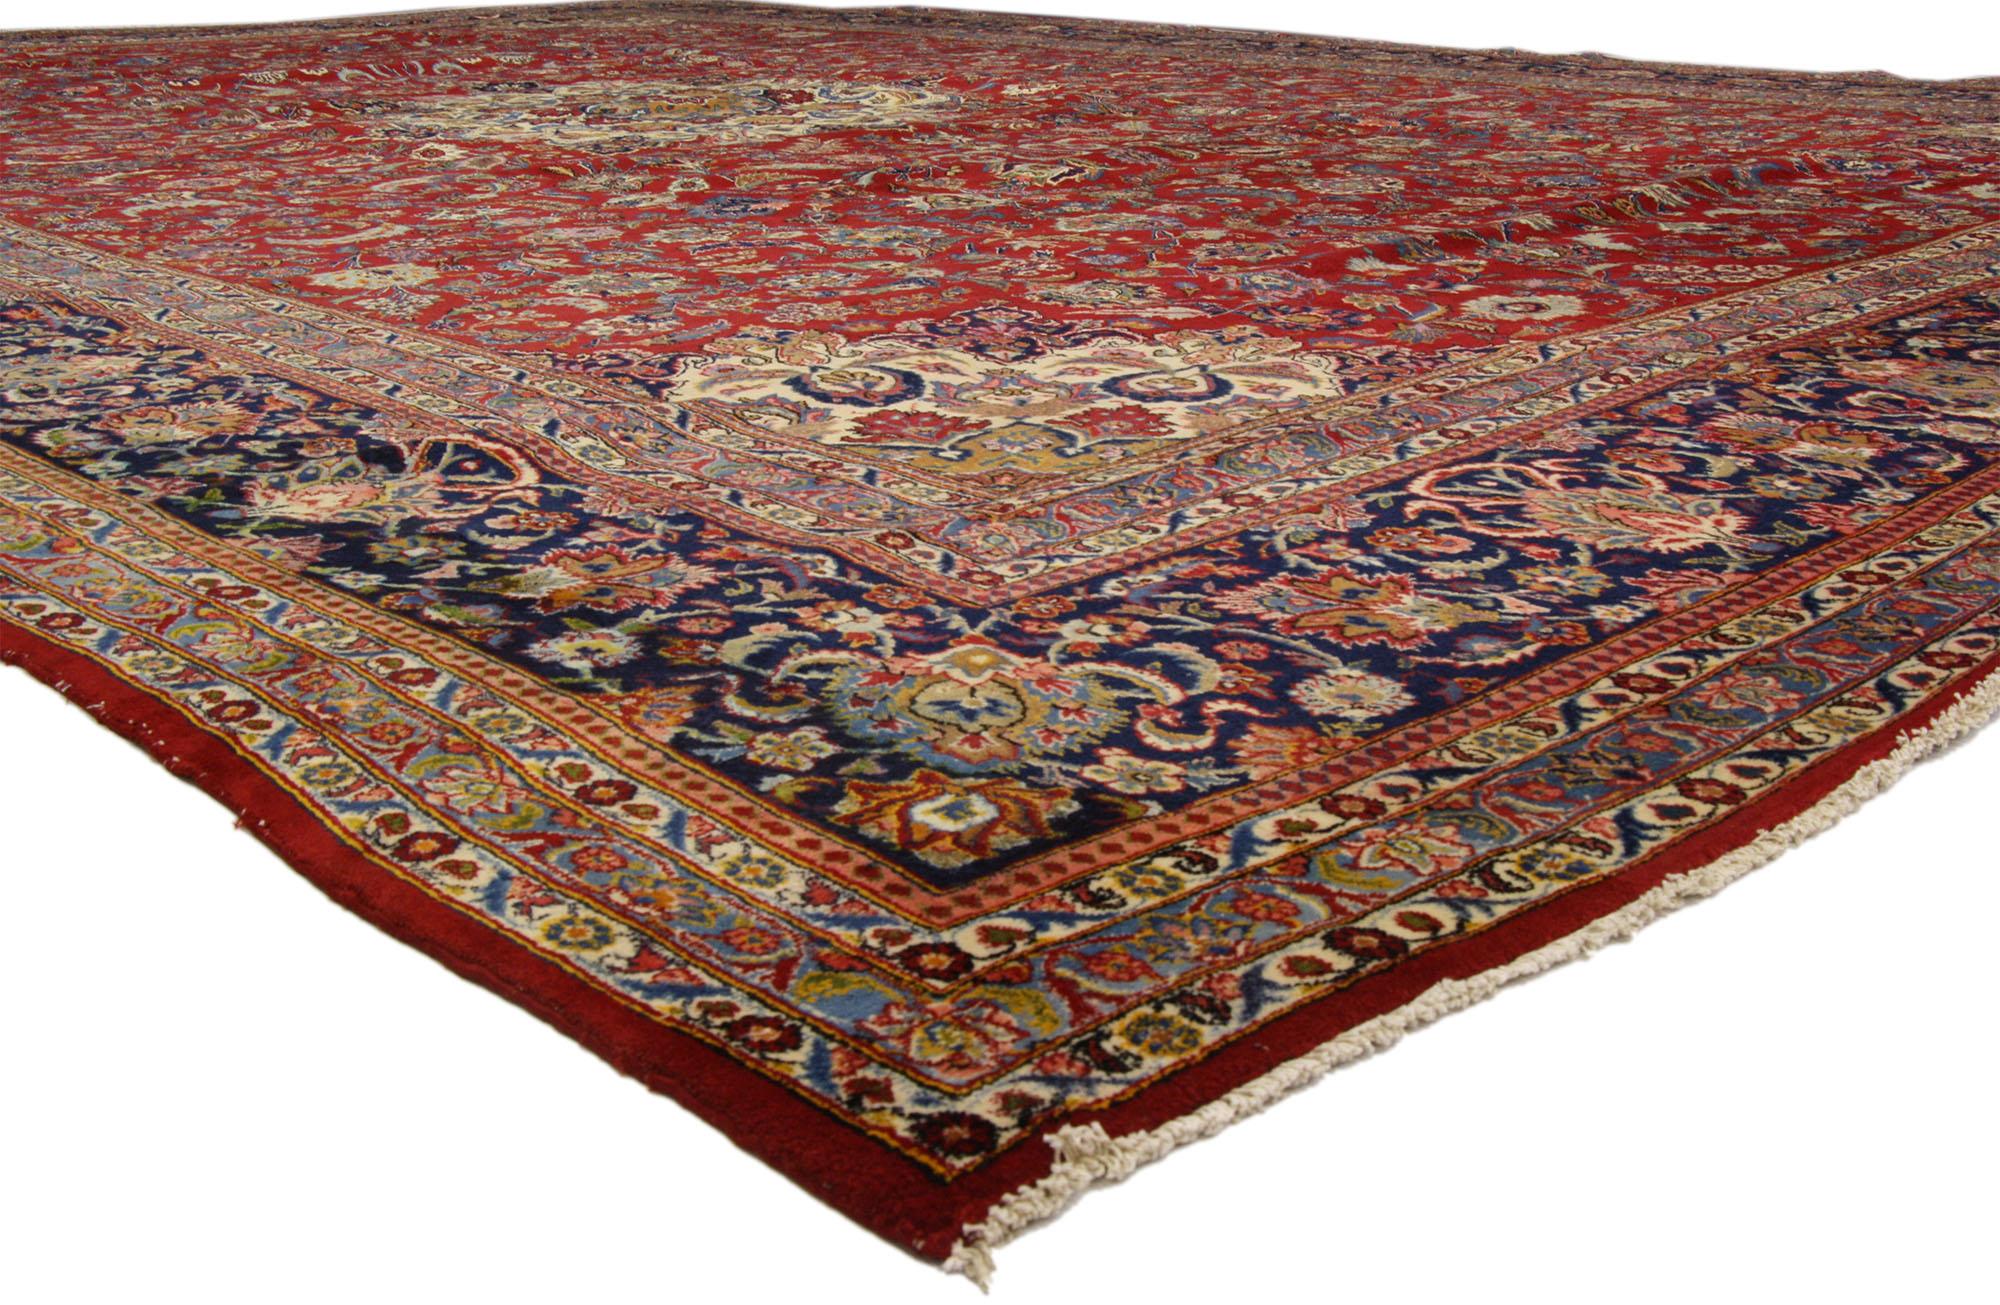 75650 Vintage Persian Kashan Palace Size Rug with Italian Rococo Style. This vintage Persian Kashan rug features a round floral 16-point medallion with elaborate corner spandrels and dense all-over floral pattern throughout the scarlet red field. It